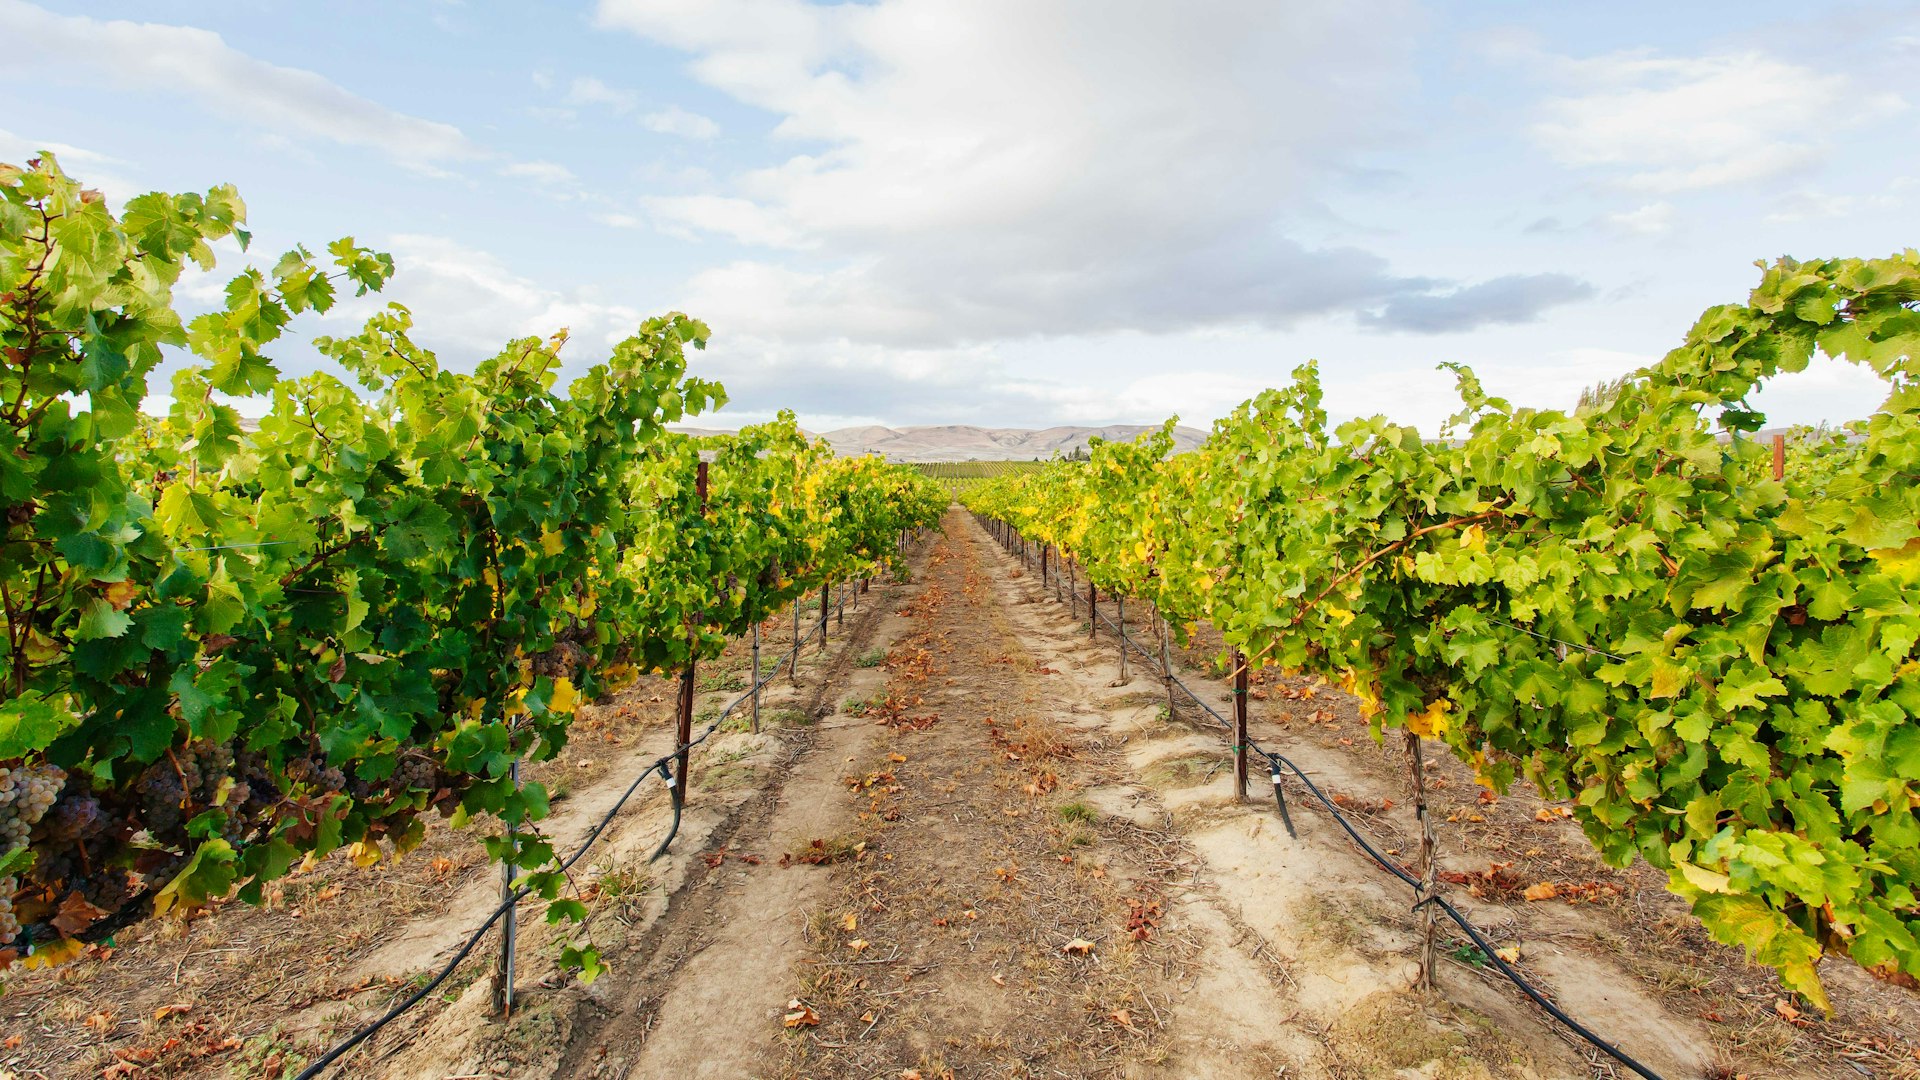 The fertile Yakima Valley is known for its wineries and vineyards. Image by Spaces Images / Getty